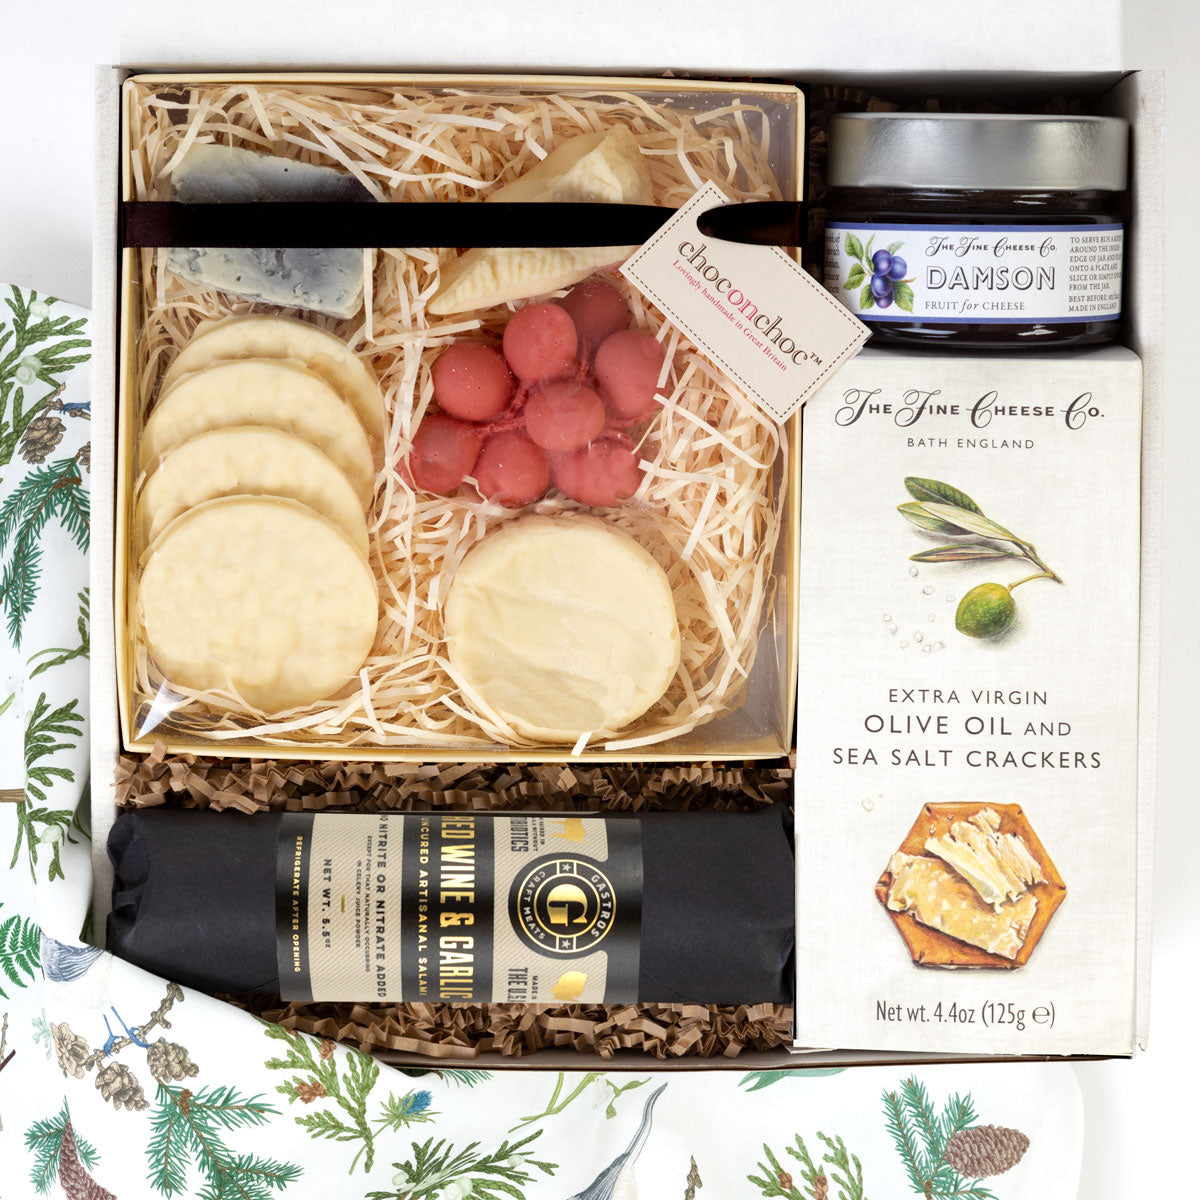 kadoo holiday cheese cracker gift box with chocolate cheese and crackers, extra virgin olive oil & sea salt crackers, jam for cheese, red wine and garlic salami.